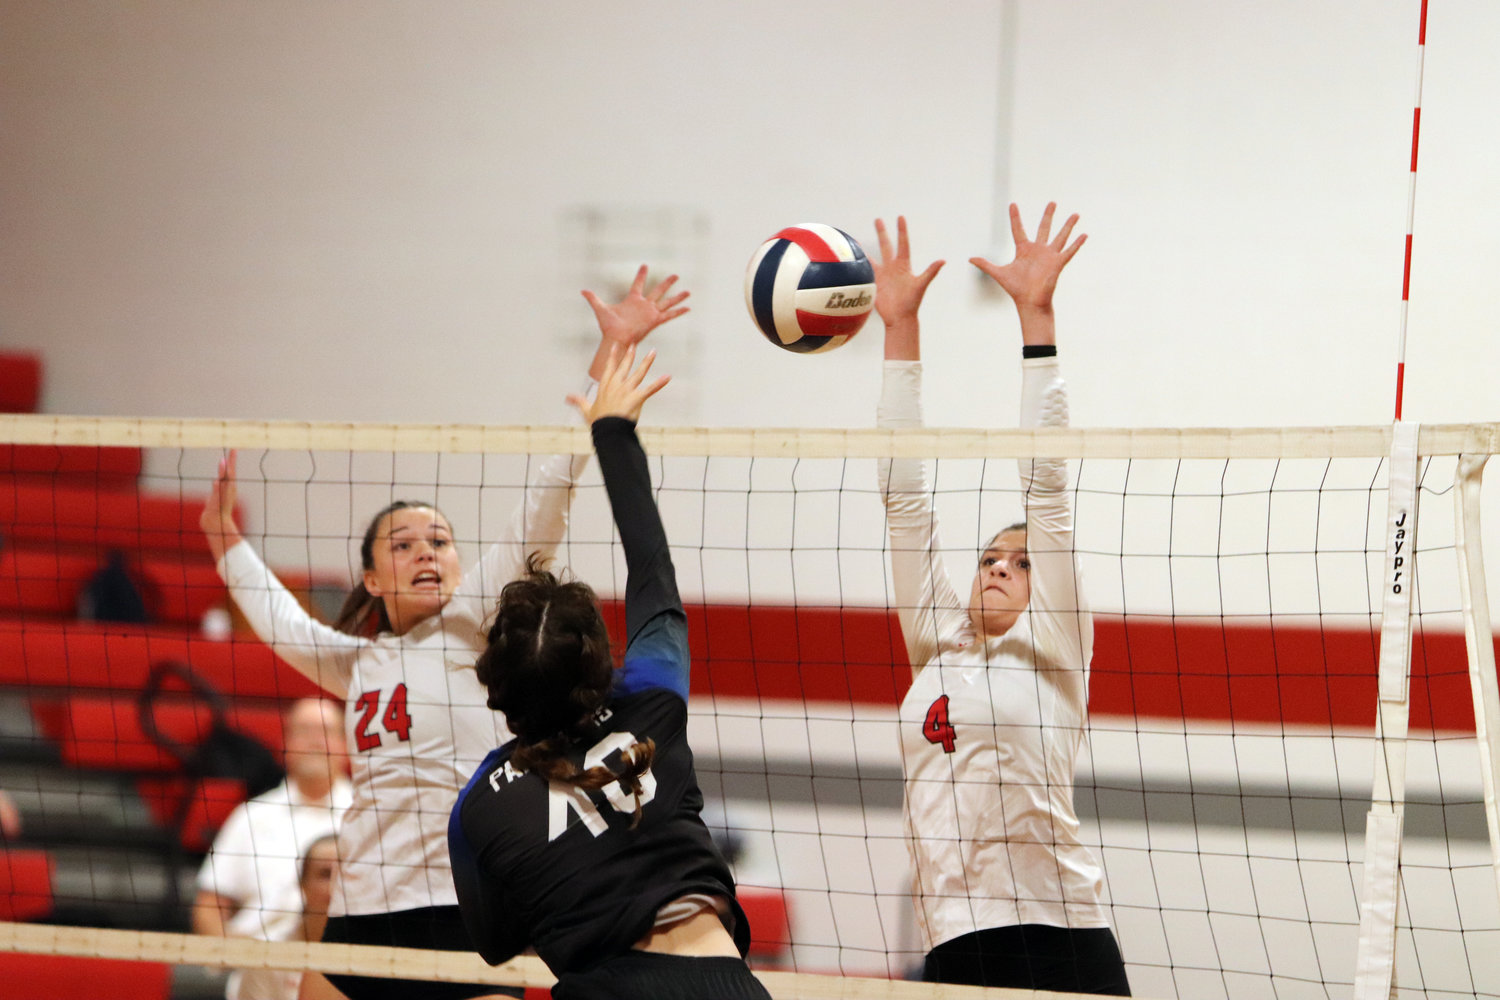 Zoe Klaus (left) and Rayne VanReed attempt to block the ball.